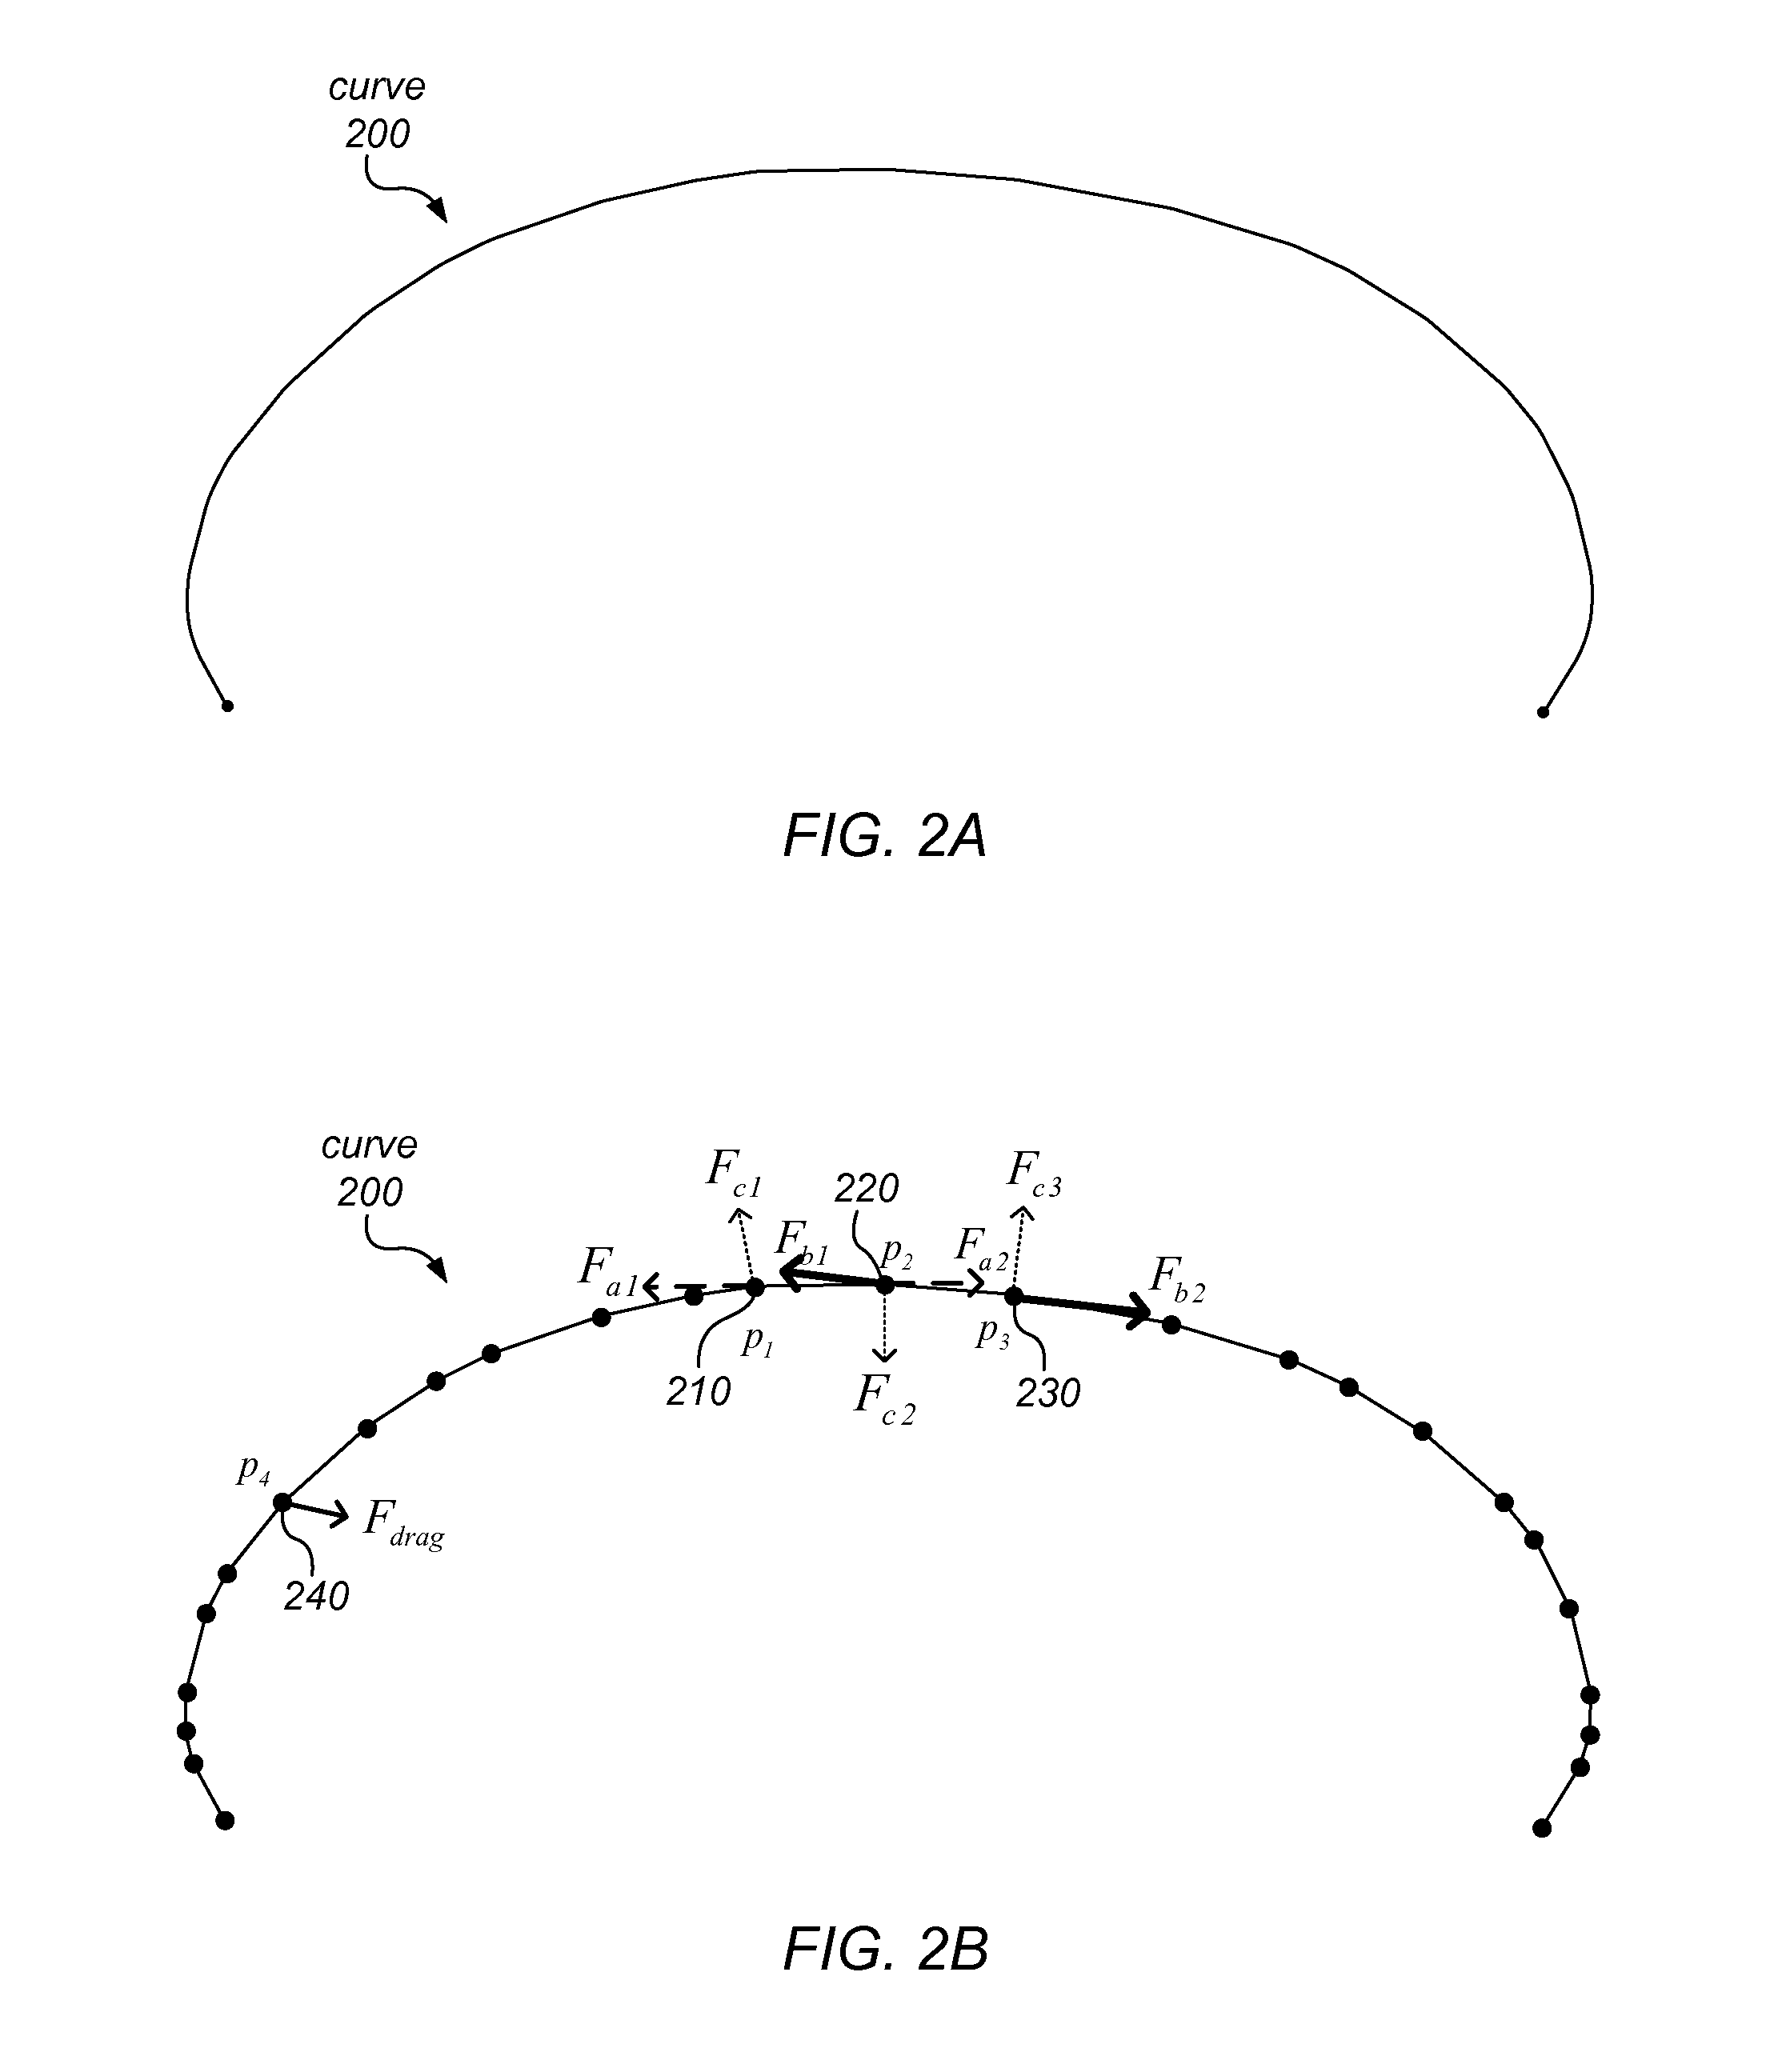 System and Method for Physically Based Curve Editing